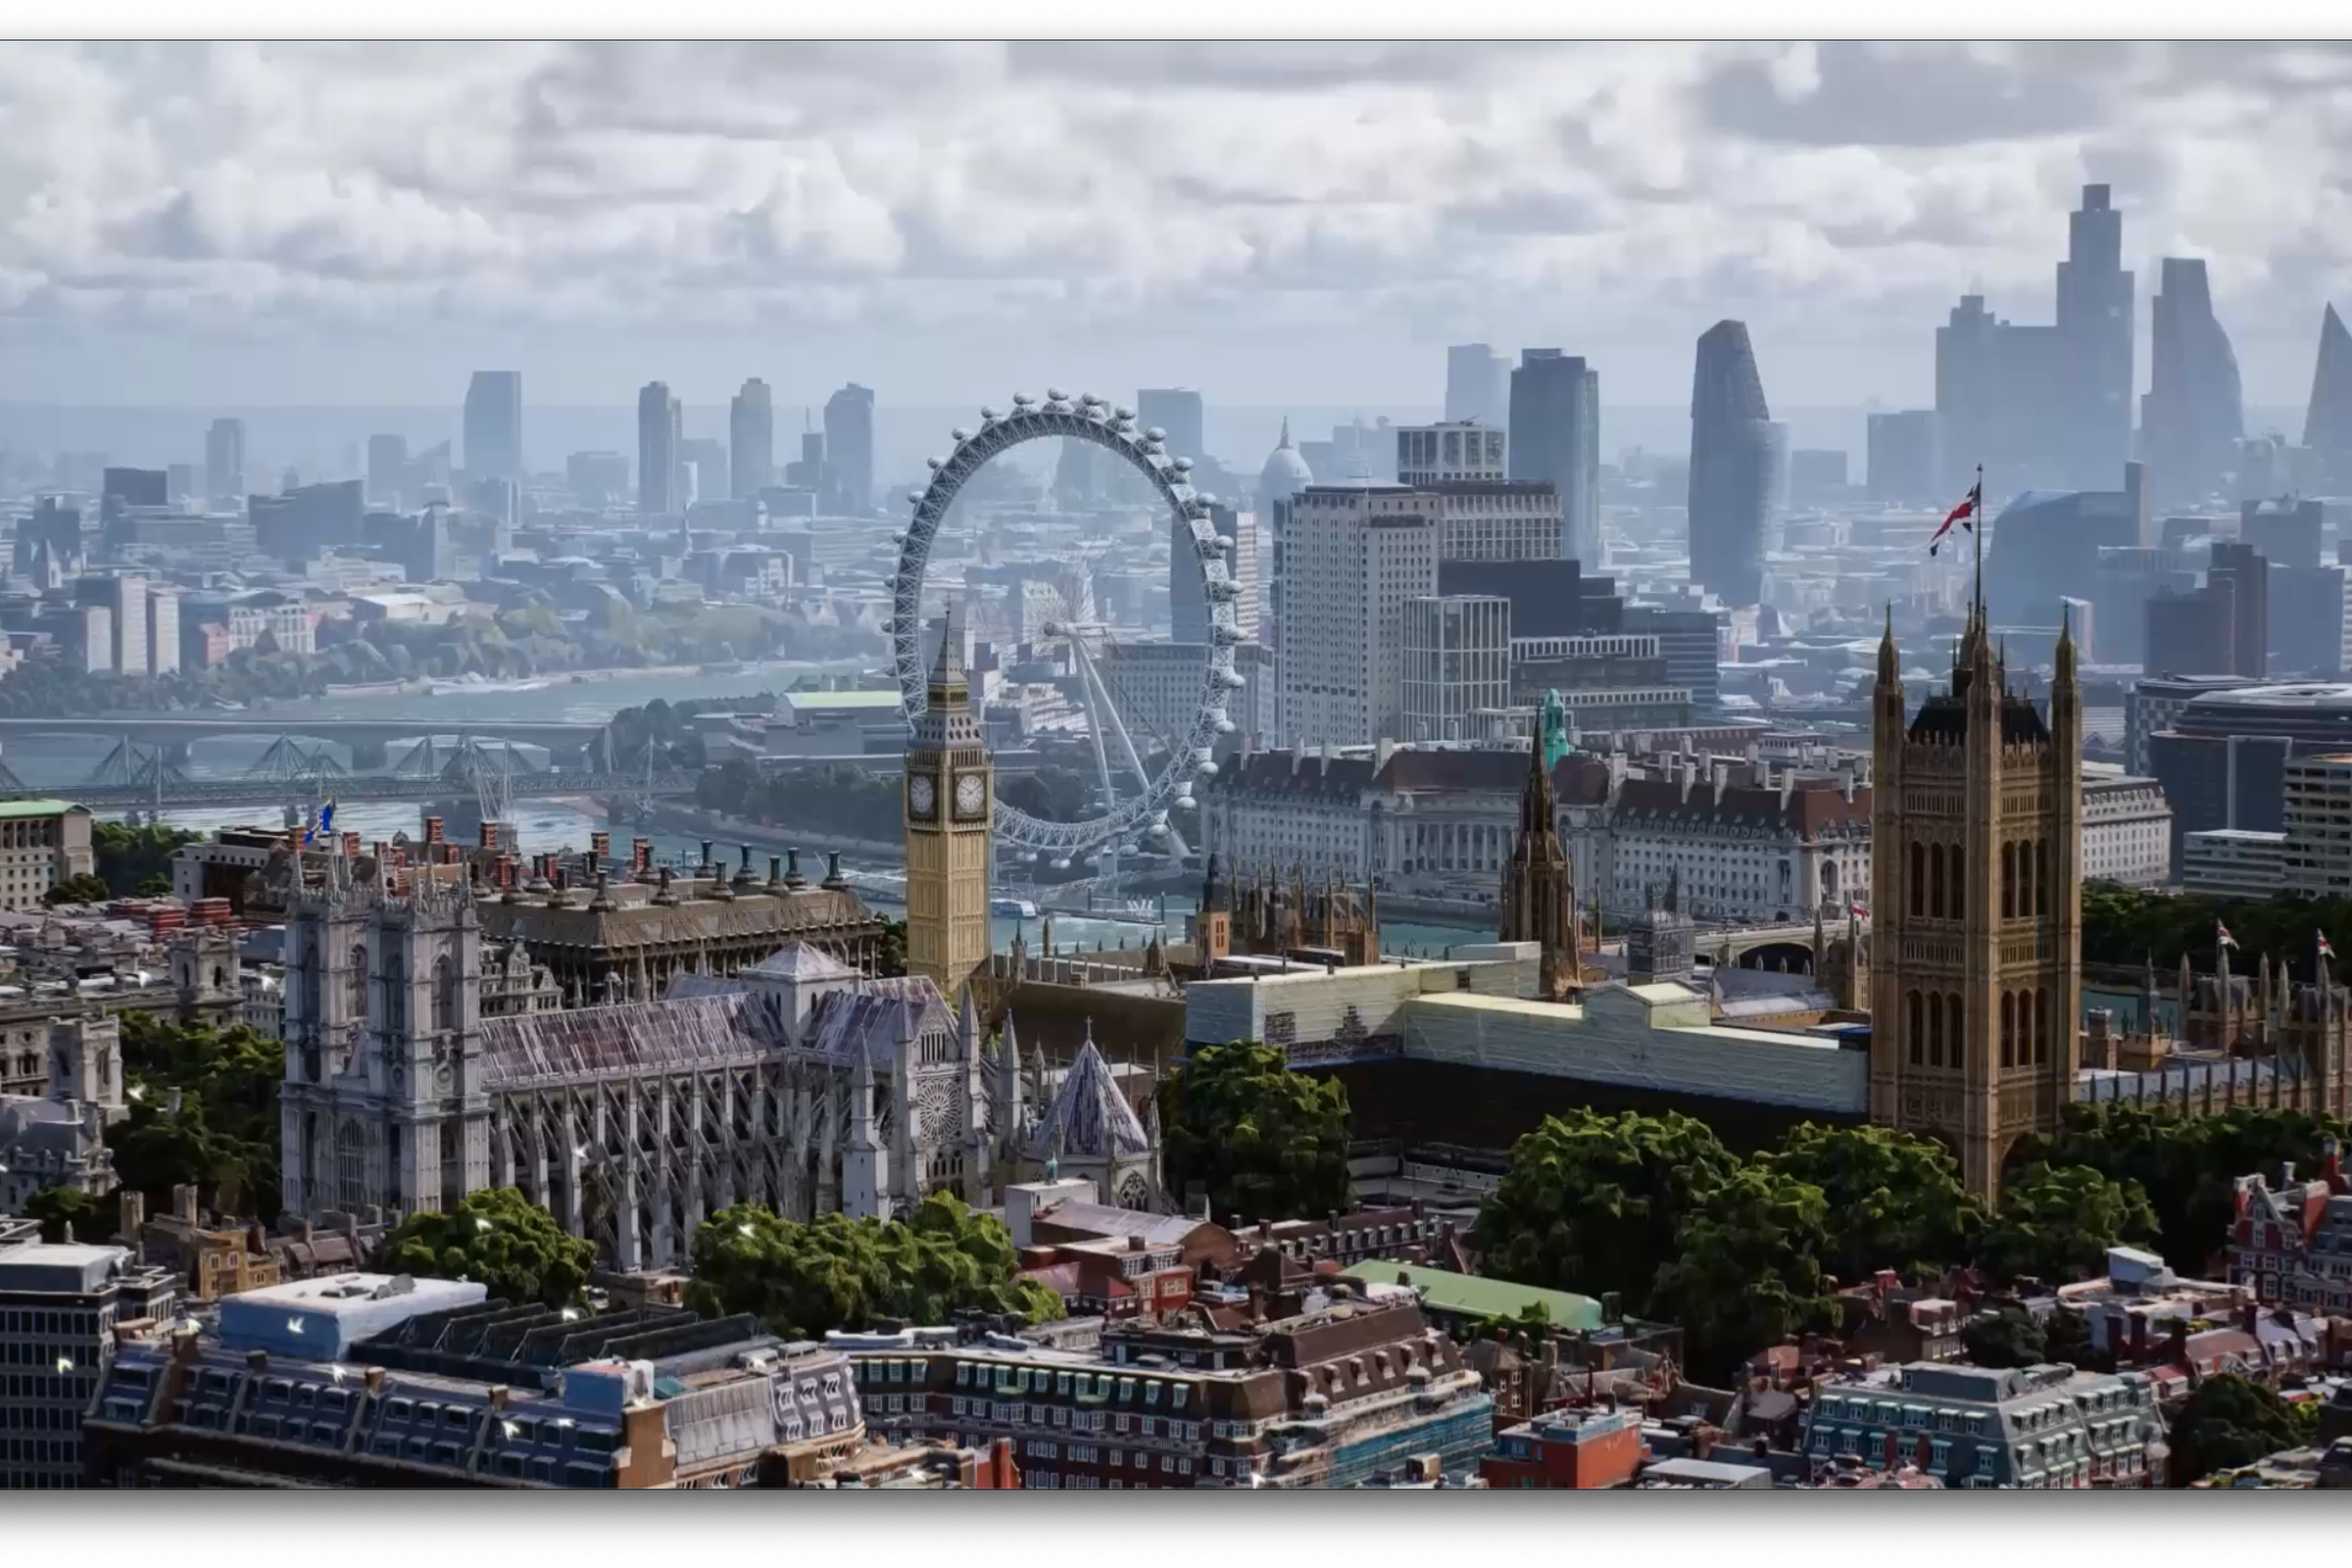 An arial view of London in Immersive View for Google Maps.